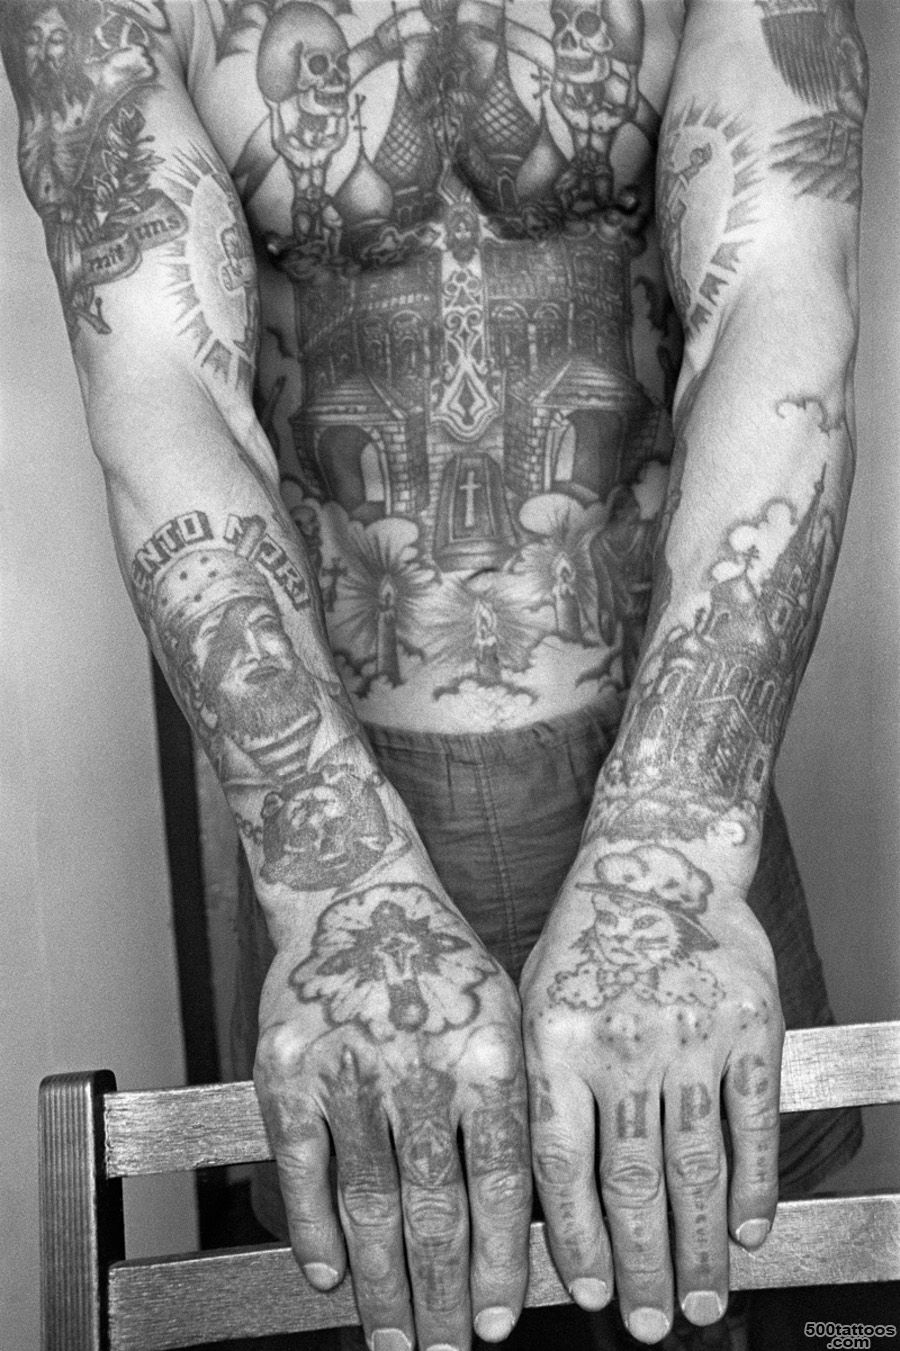 Decoding the hidden meaning behind Russian prison tattoos (Photos)_22